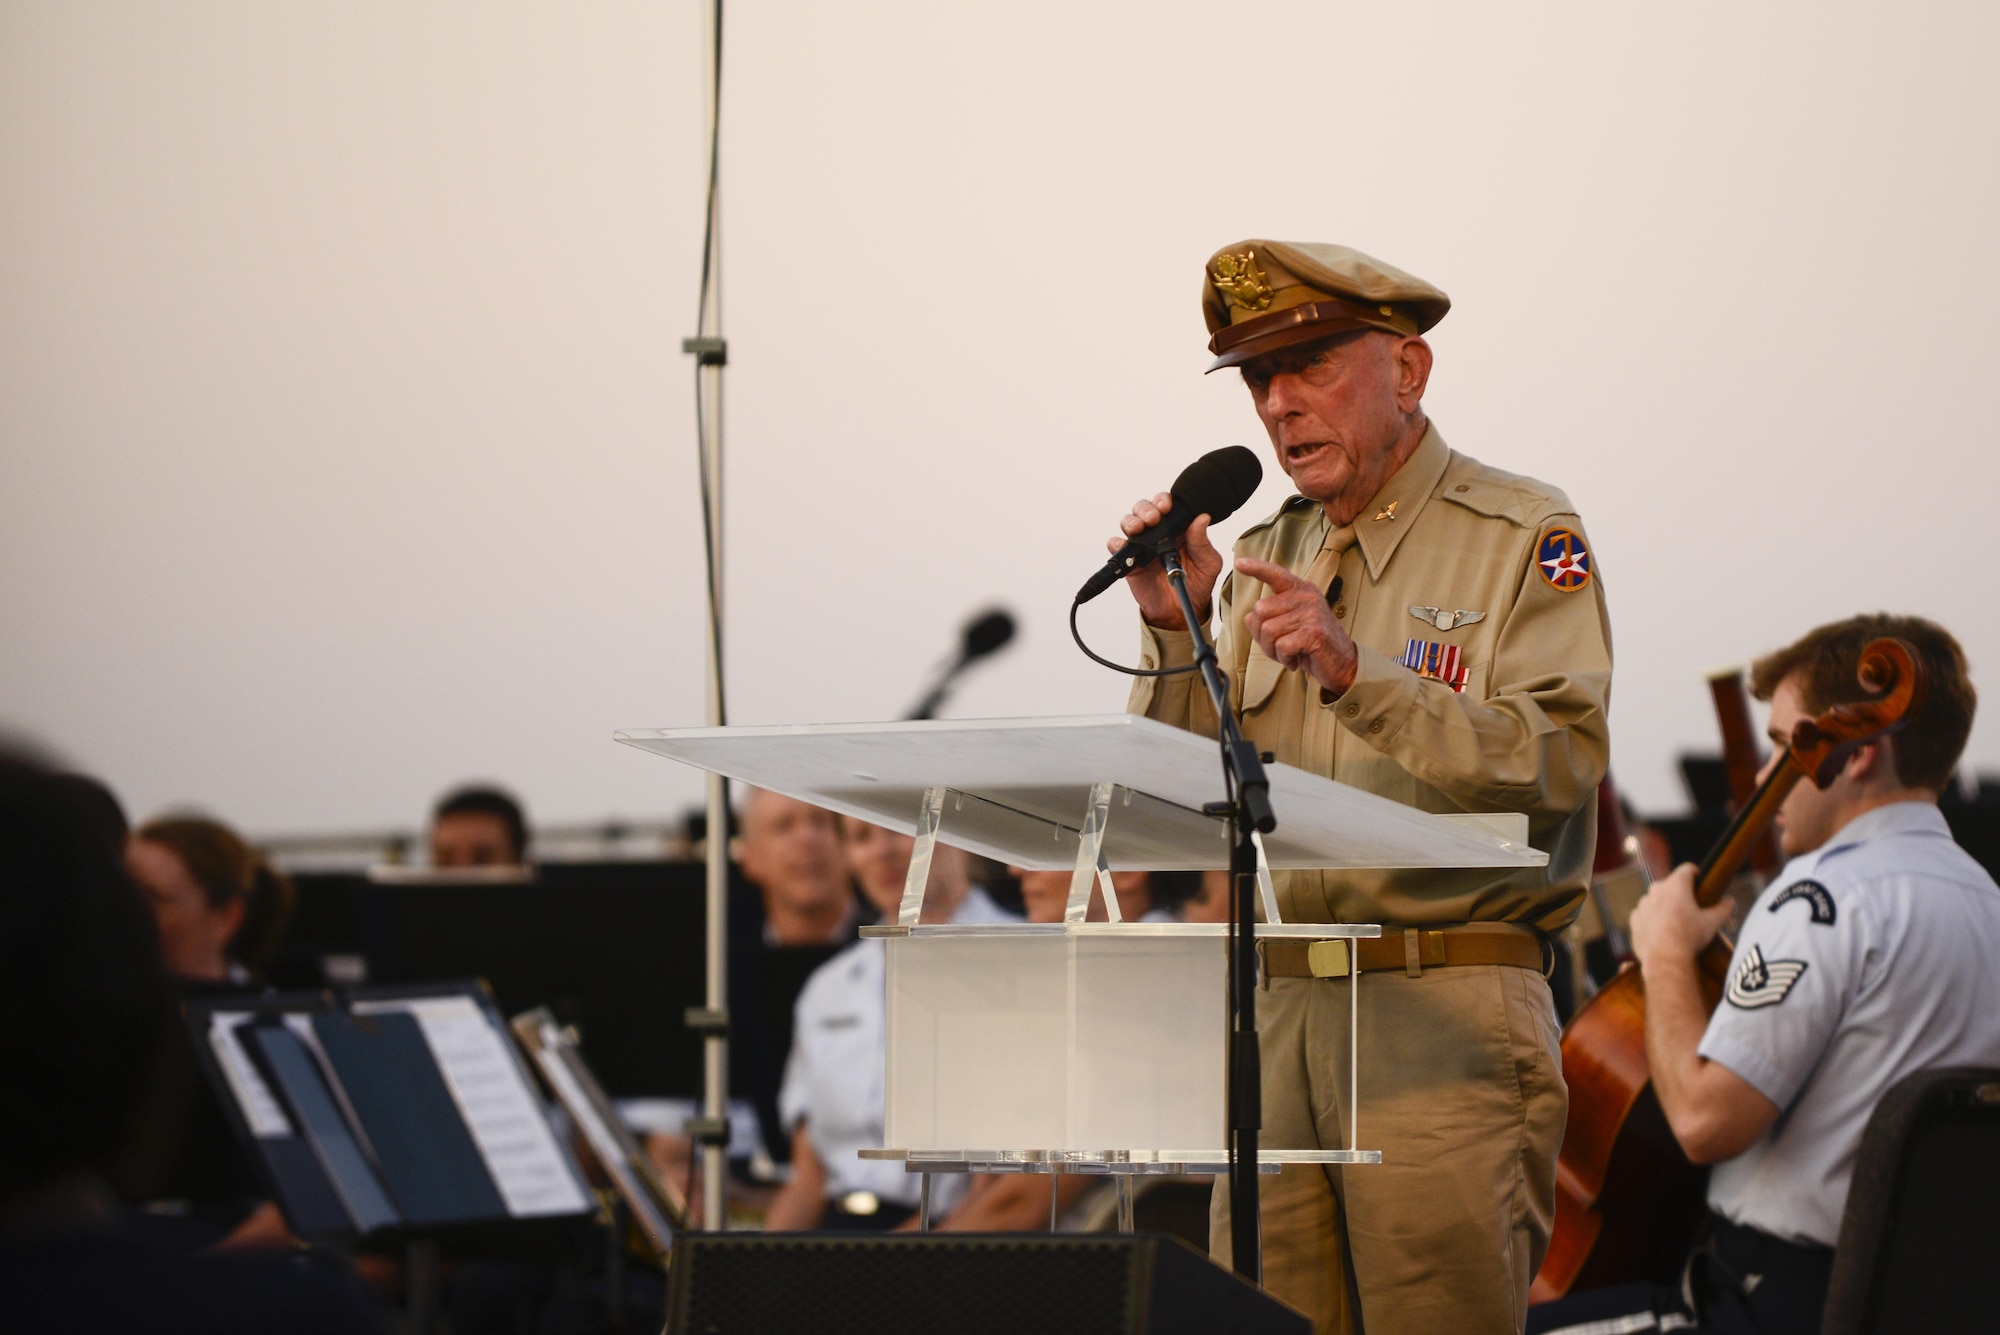 Retired Army Air Corps Capt. Jerry Yellin speaks briefly before taking part in a wreath-laying ceremony commemorating the 70th anniversary of the end of World War II, Aug. 14, 2015, at the Air Force Memorial in Arlington, Virginia. There was also a four-ship P-51 Mustang flyover, as well as a concert performed by the Air Force Band.  (Air Force photo/Tech. Sgt. Joshua L. DeMotts)